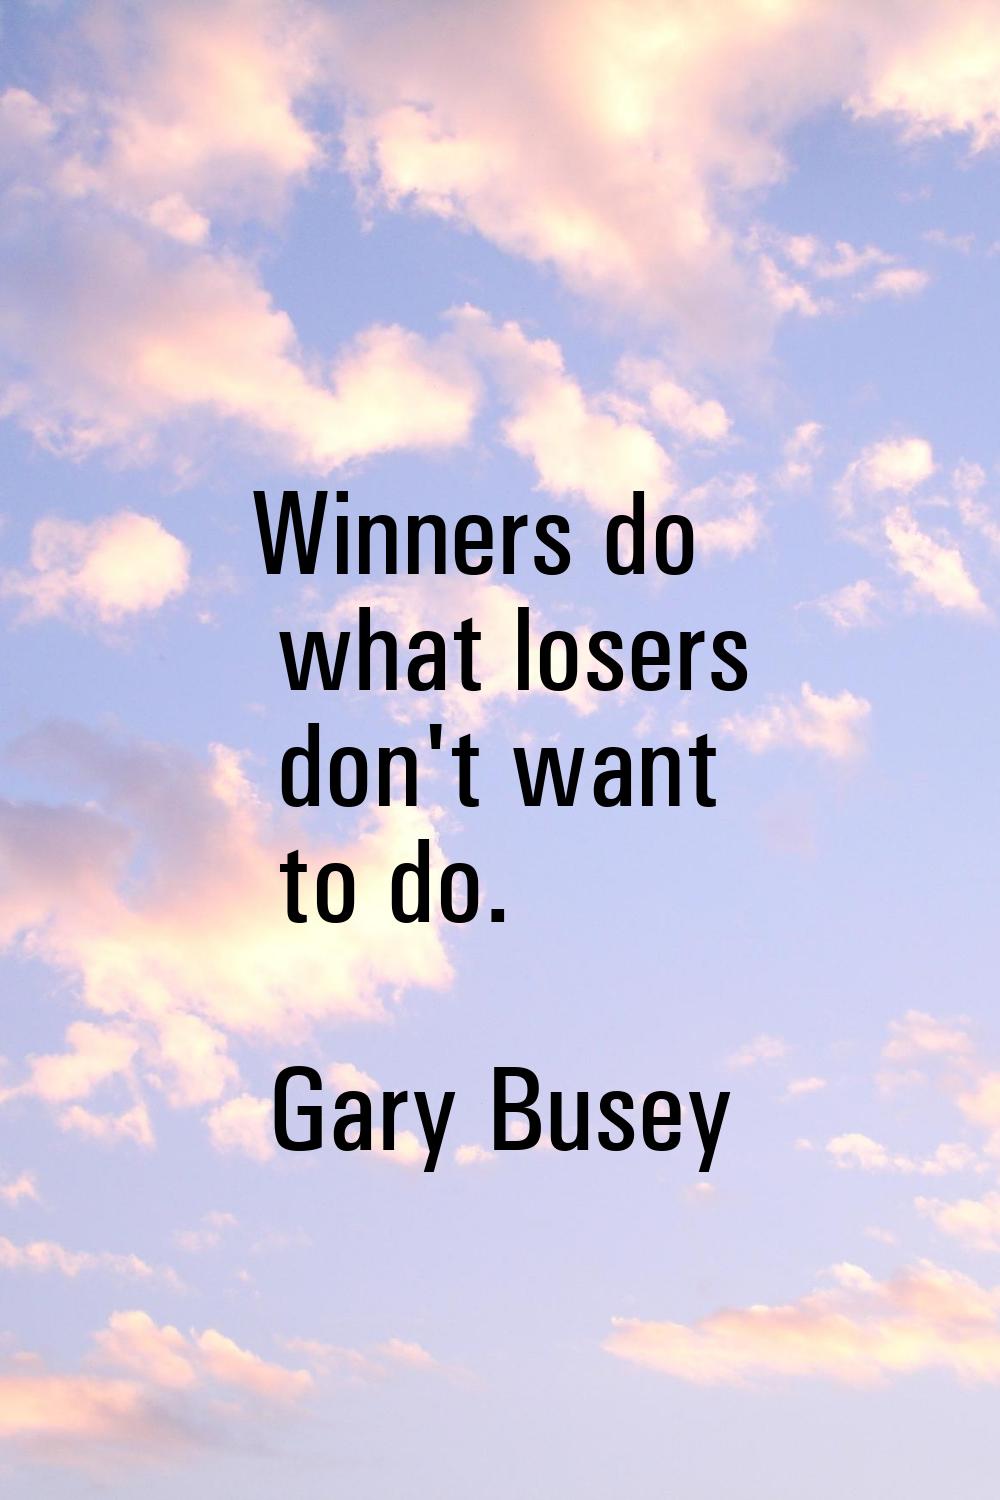 Winners do what losers don't want to do.